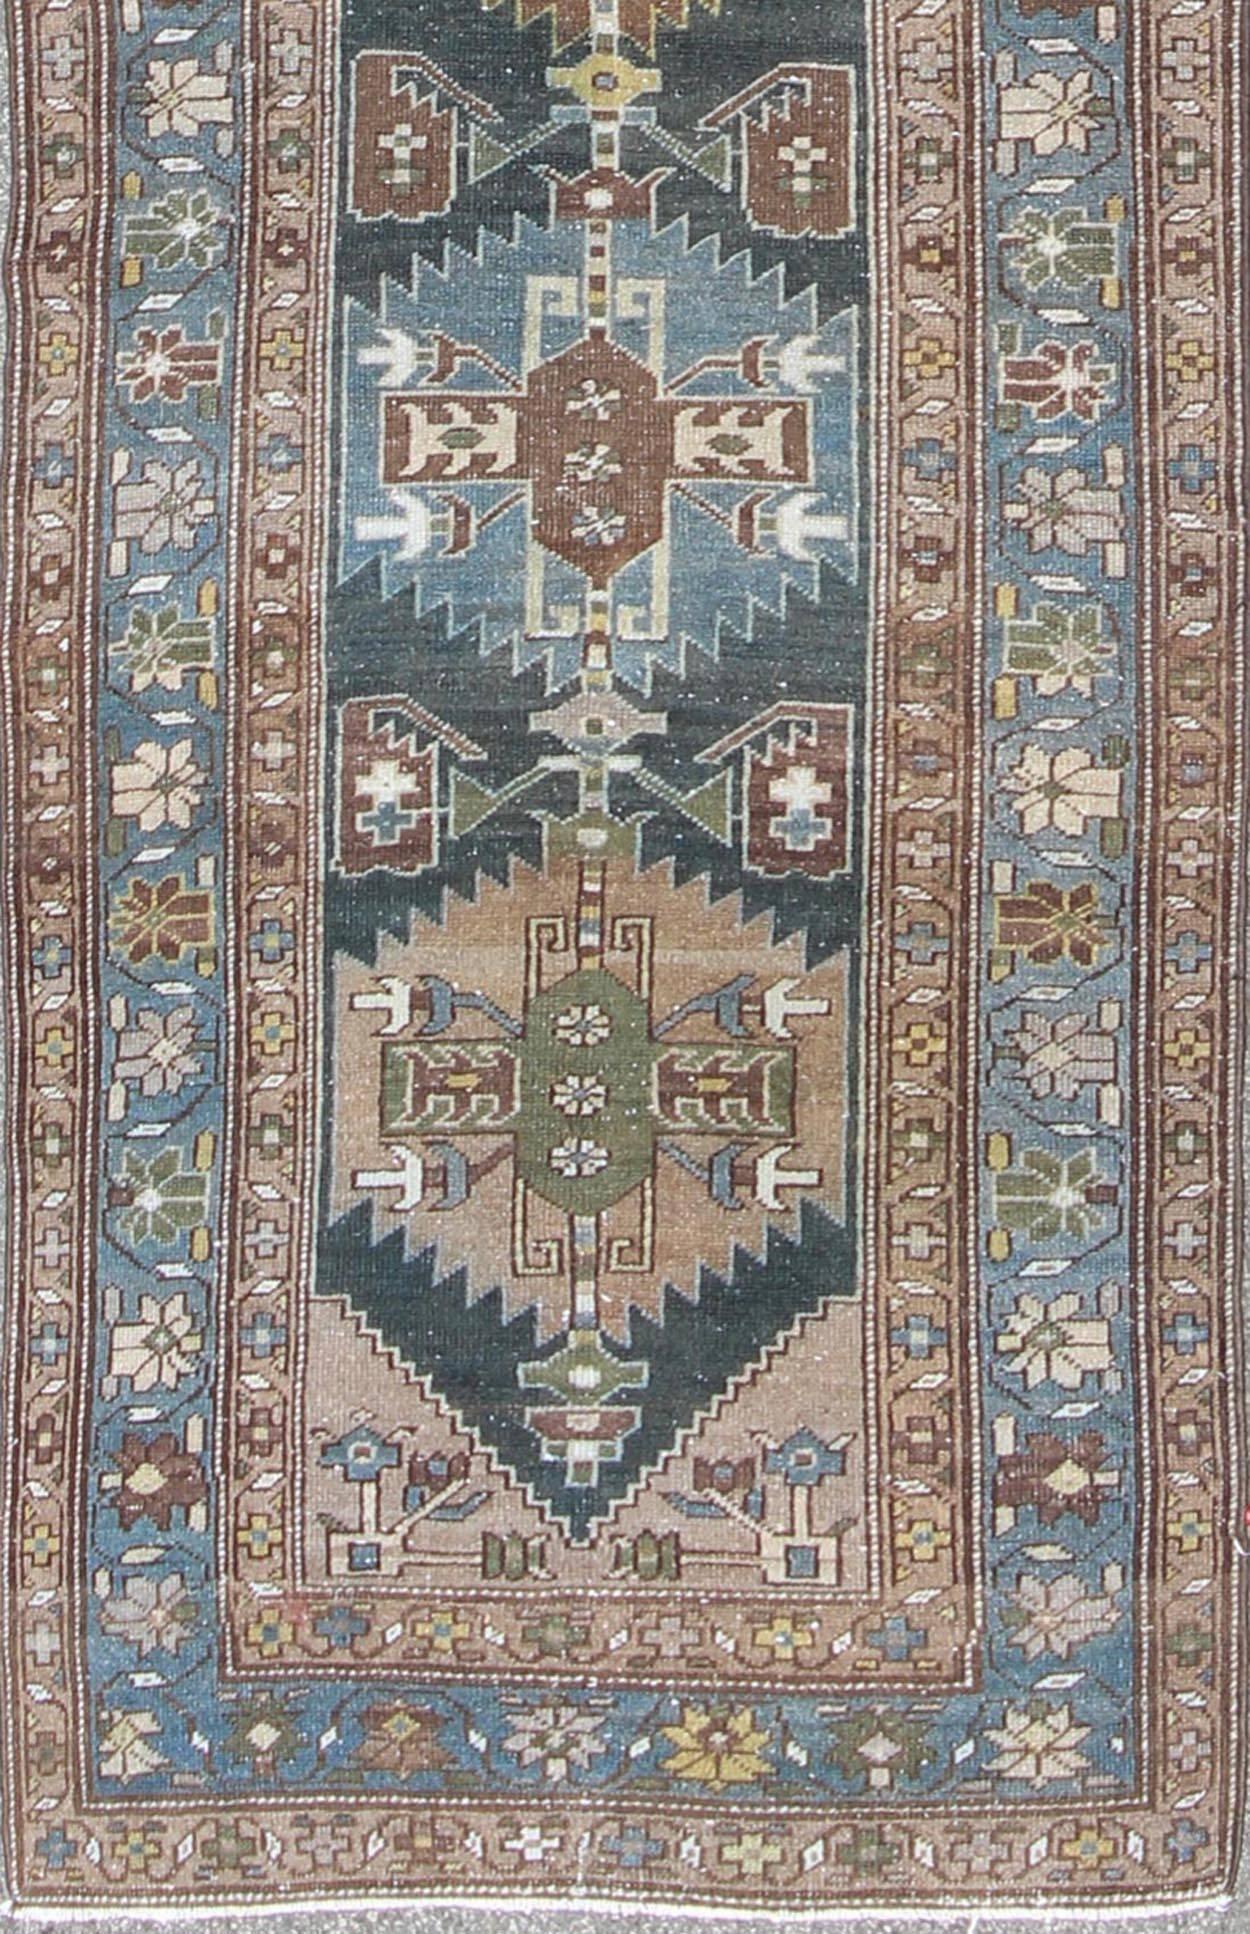 Tribal medallion antique Persian Hamedan runner in tan, taupe, and blue tones, rug na-170118, country of origin / type: Iran / Hamedan, circa 1920

This antique Persian Hamedan gallery rug (circa early 20th century) features a unique blend of